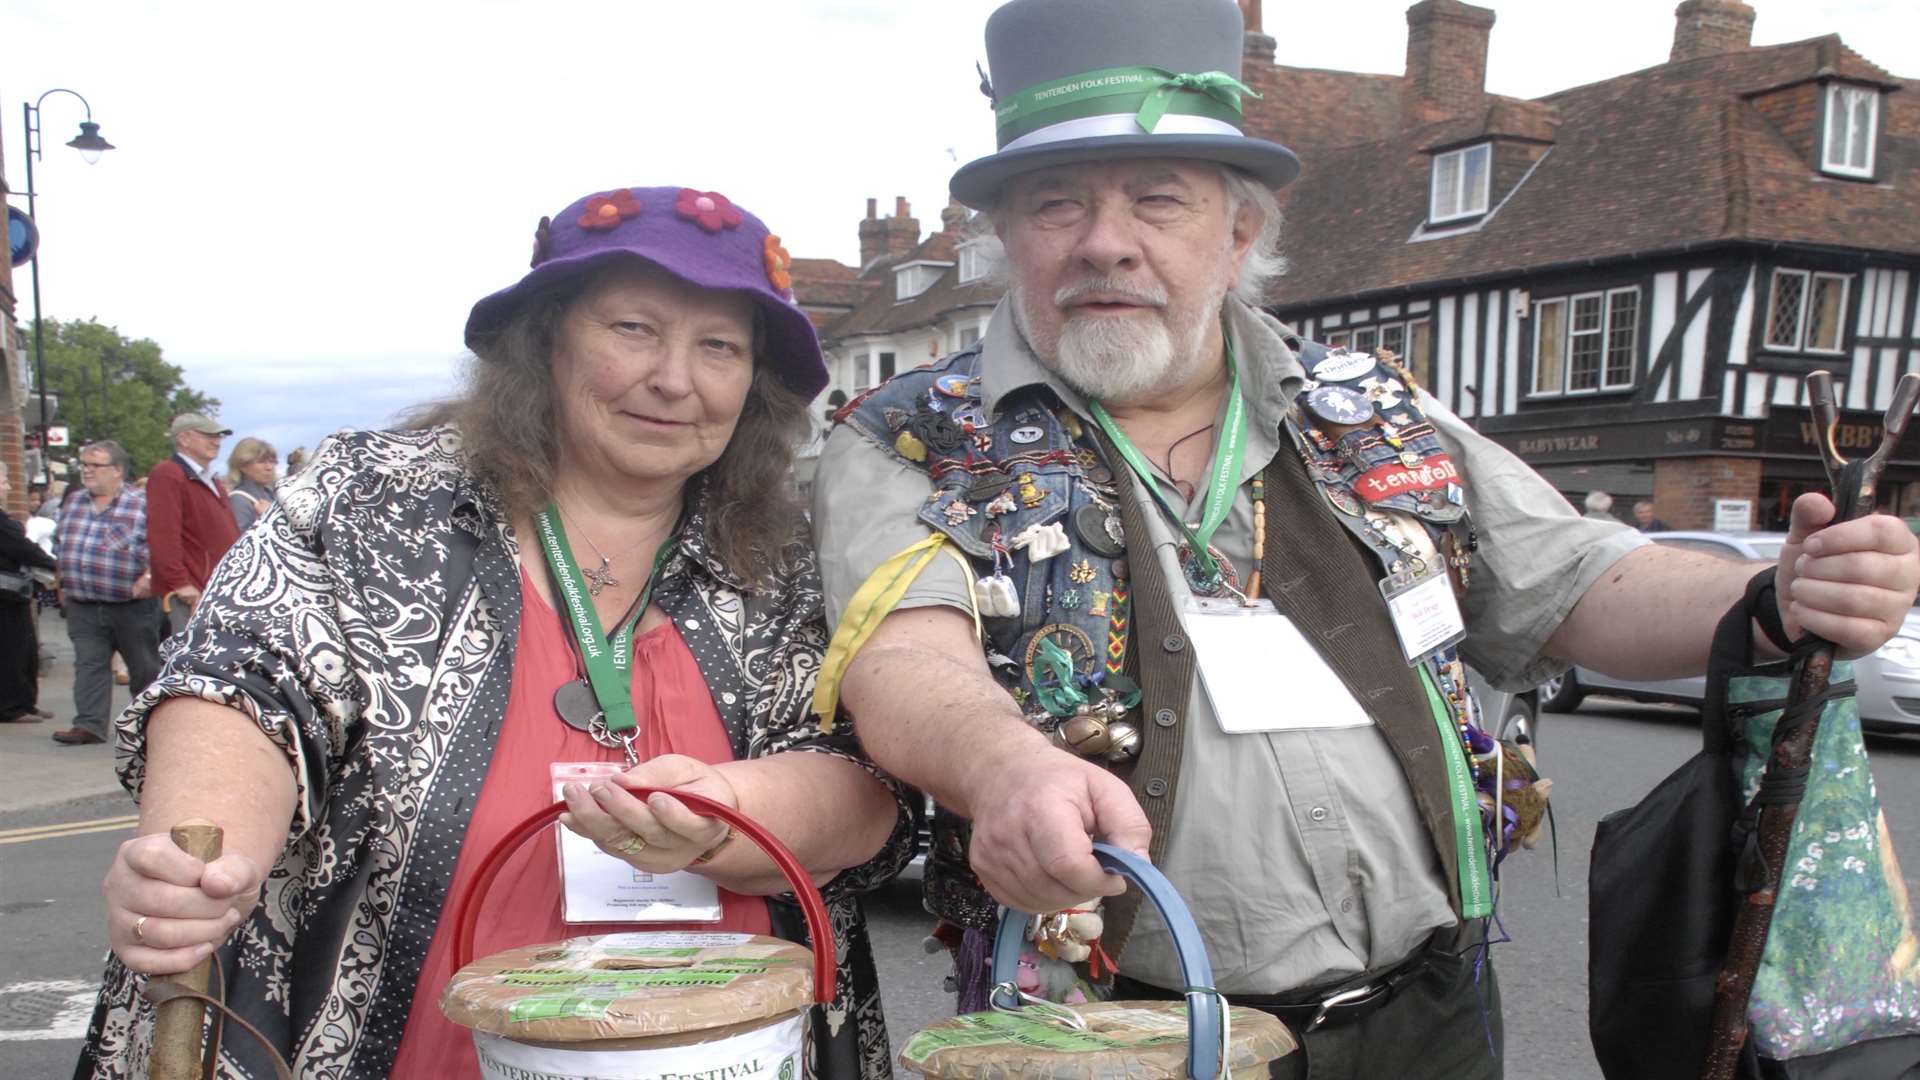 The duo enjoying the Tenterden Folk Festival. Picture by Chris Davey